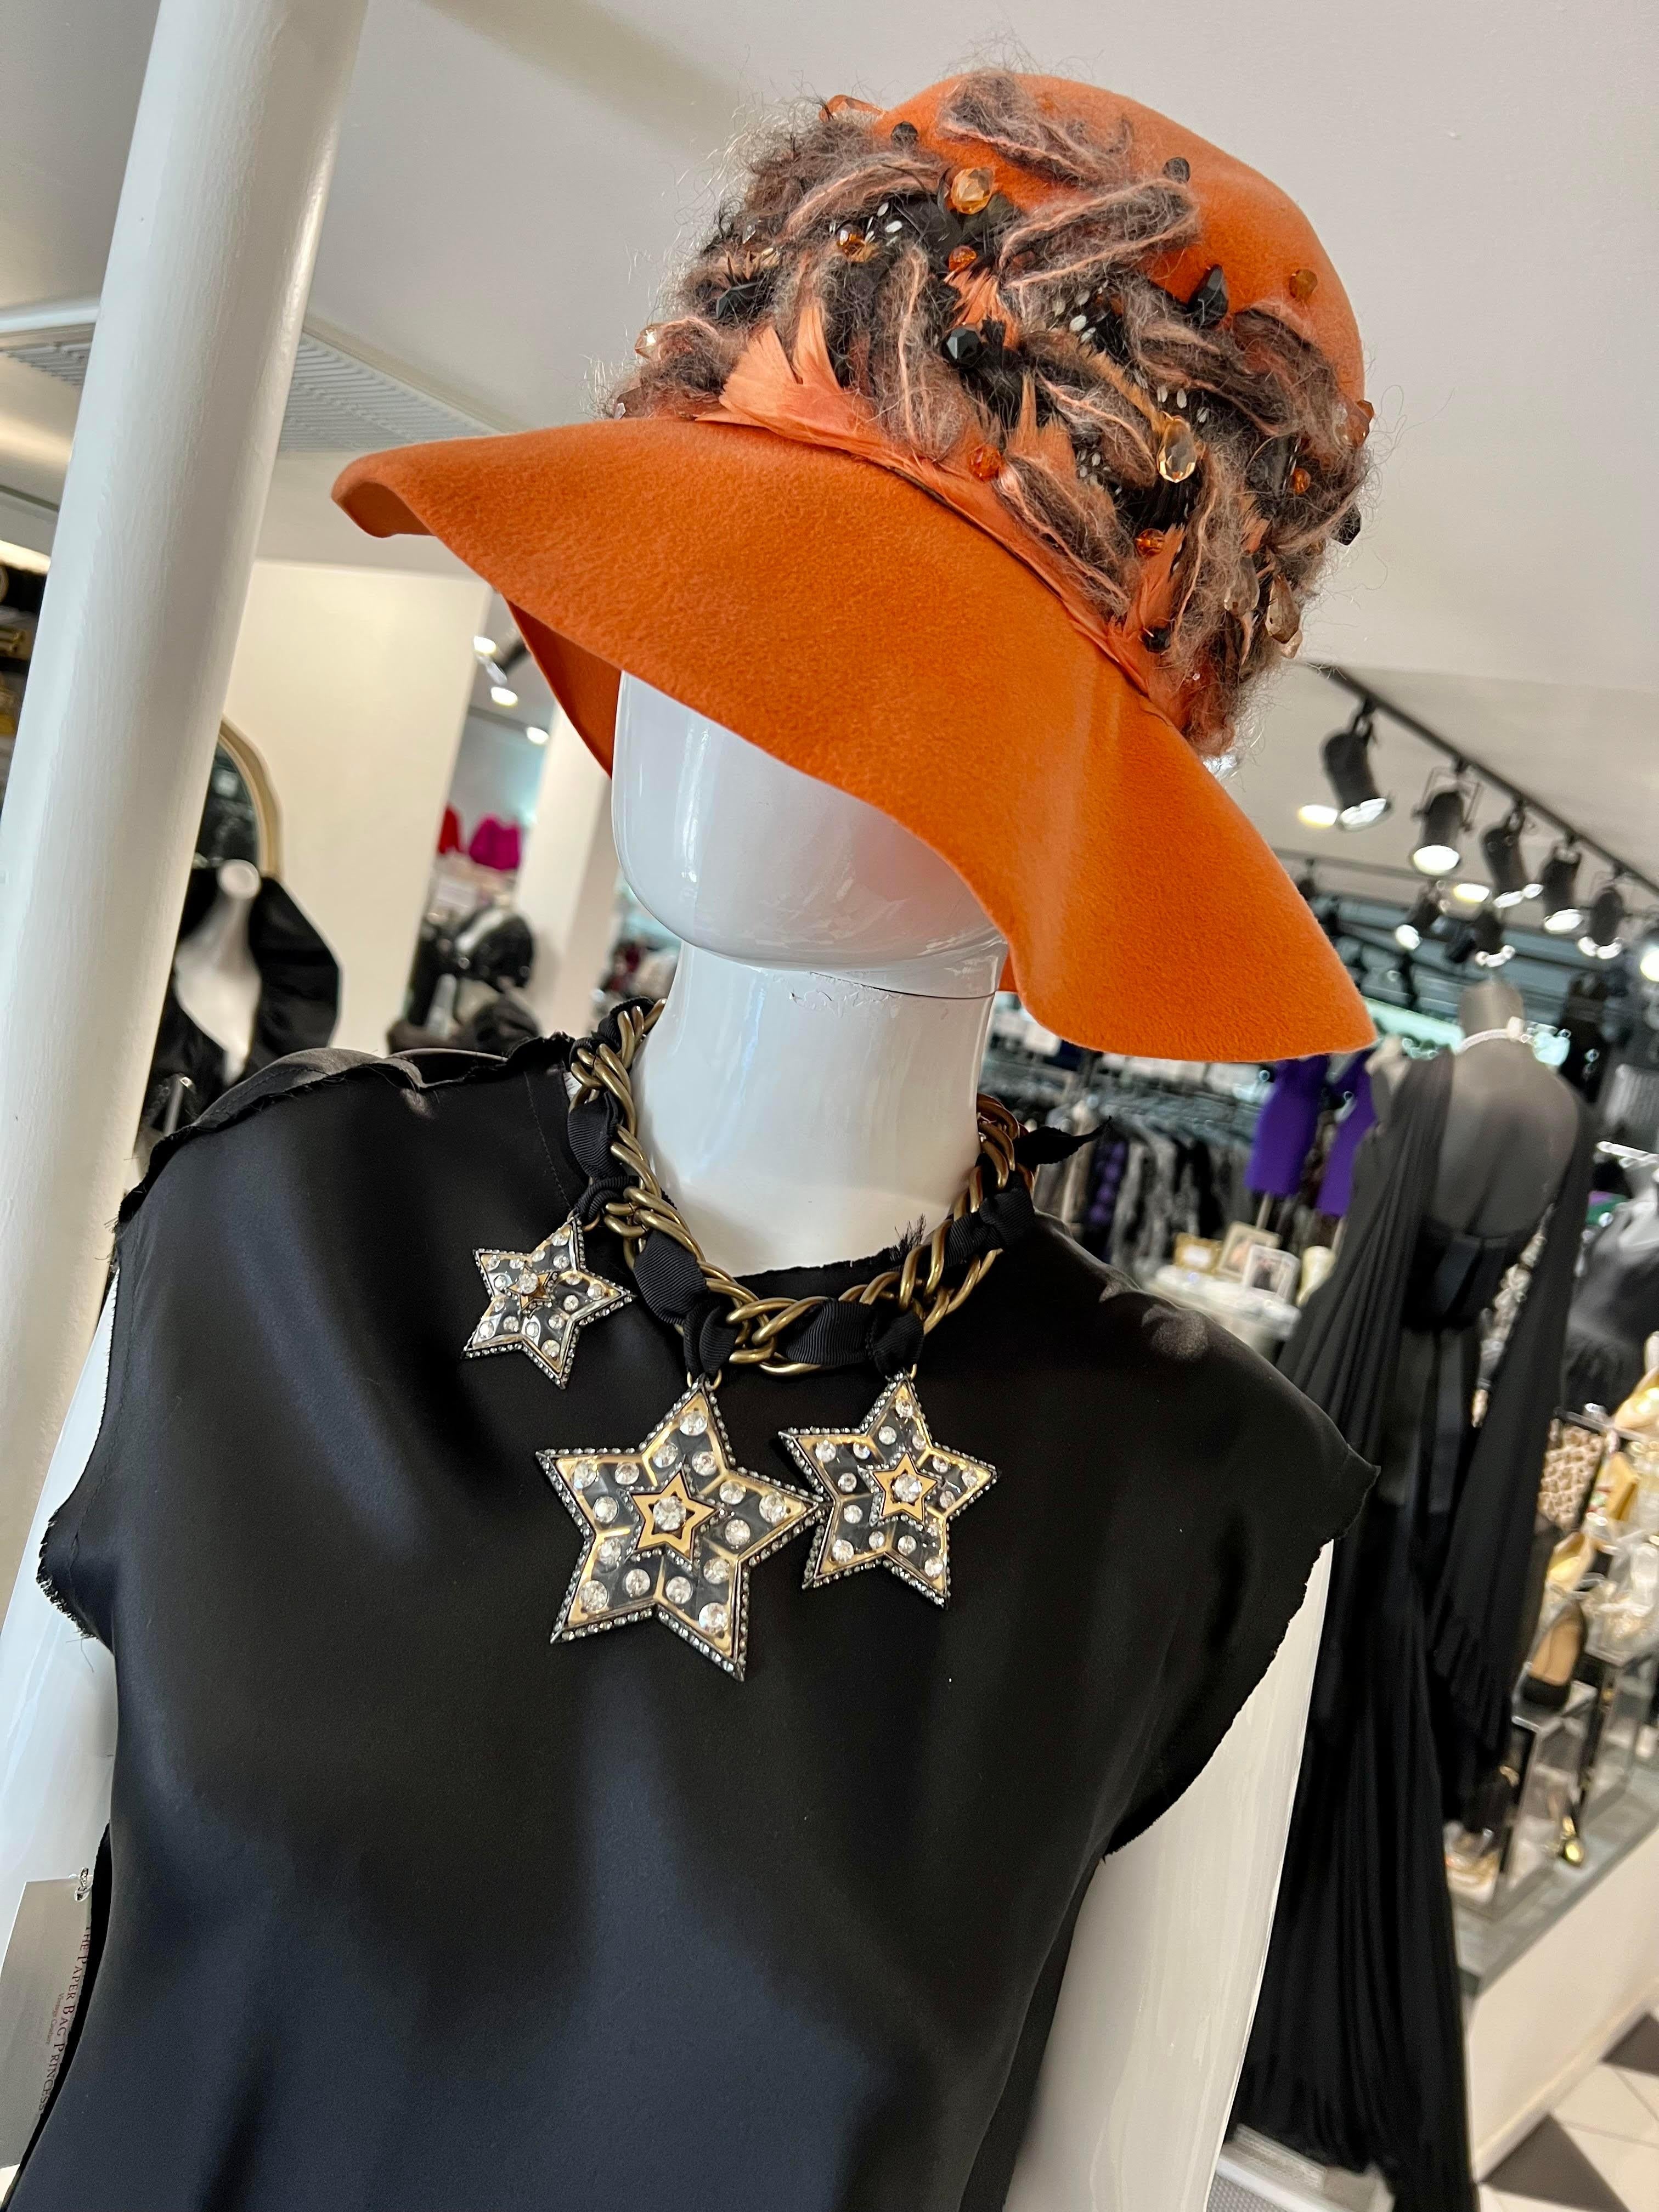 Christian Dior Chapeaux Orange Floppy Hat w/ Feathers, Yarn, & Beads For Sale 1